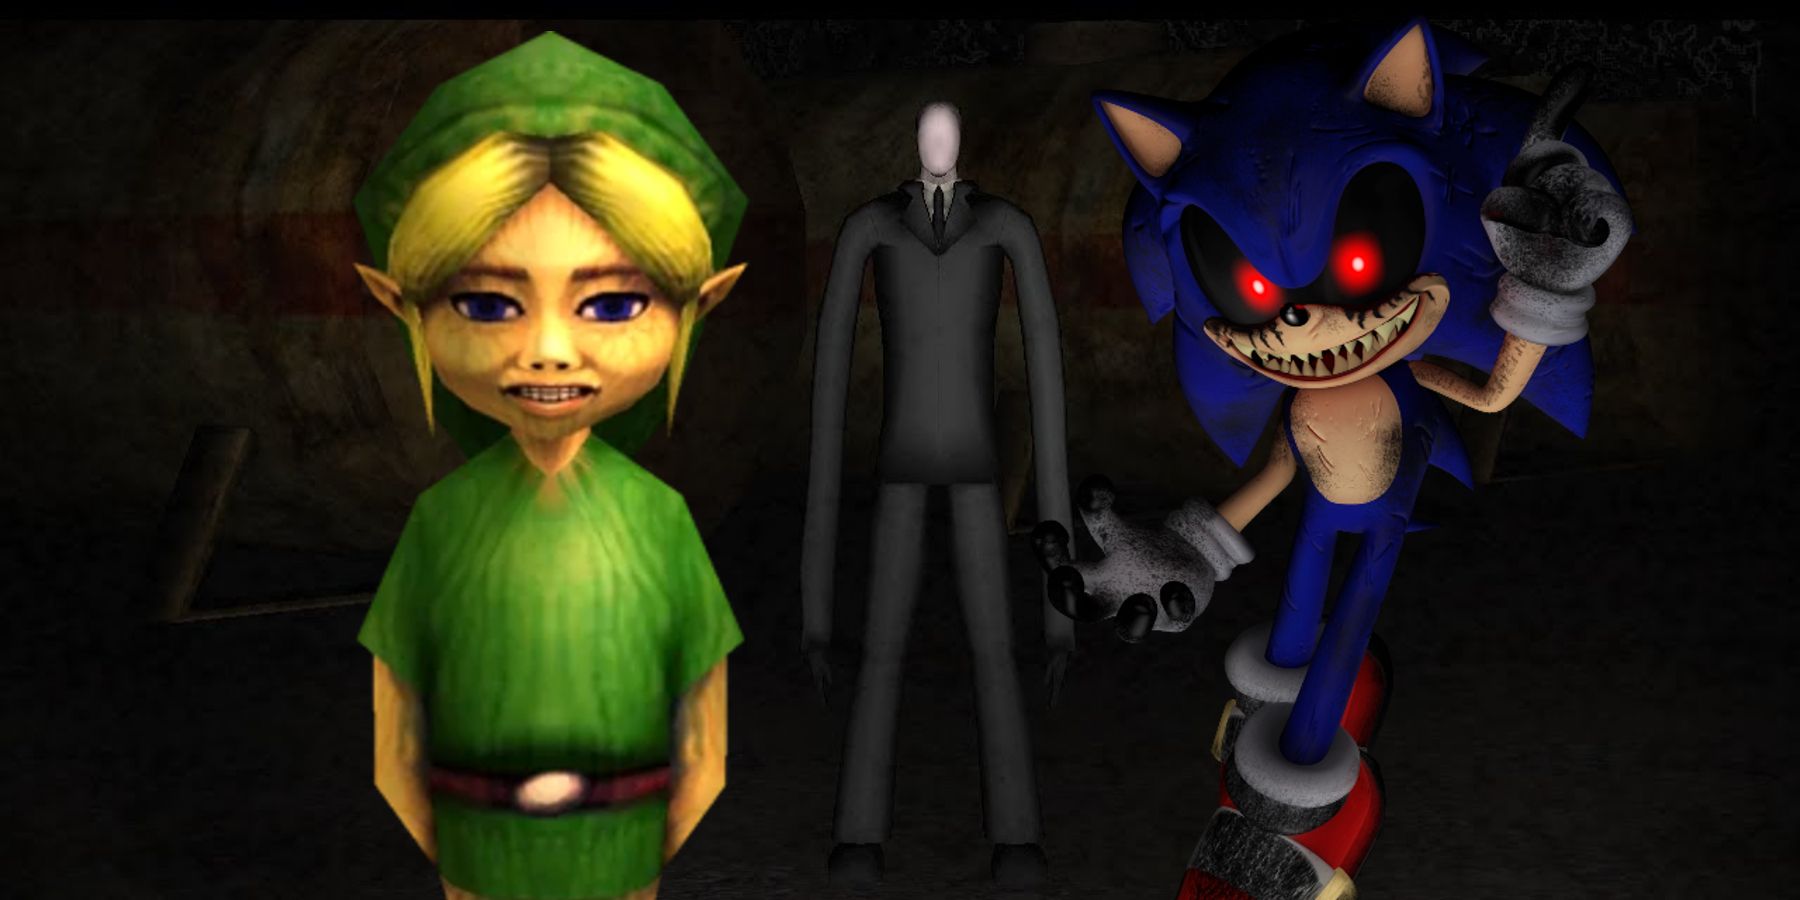 Image featuring BEN Drowned, Slender Man, and Sonic.exe. BEN is a creepy version of Link from Zelda, while Sonic.exe is the original hedgehog with glowing red eyes and a razor-sharp grin.